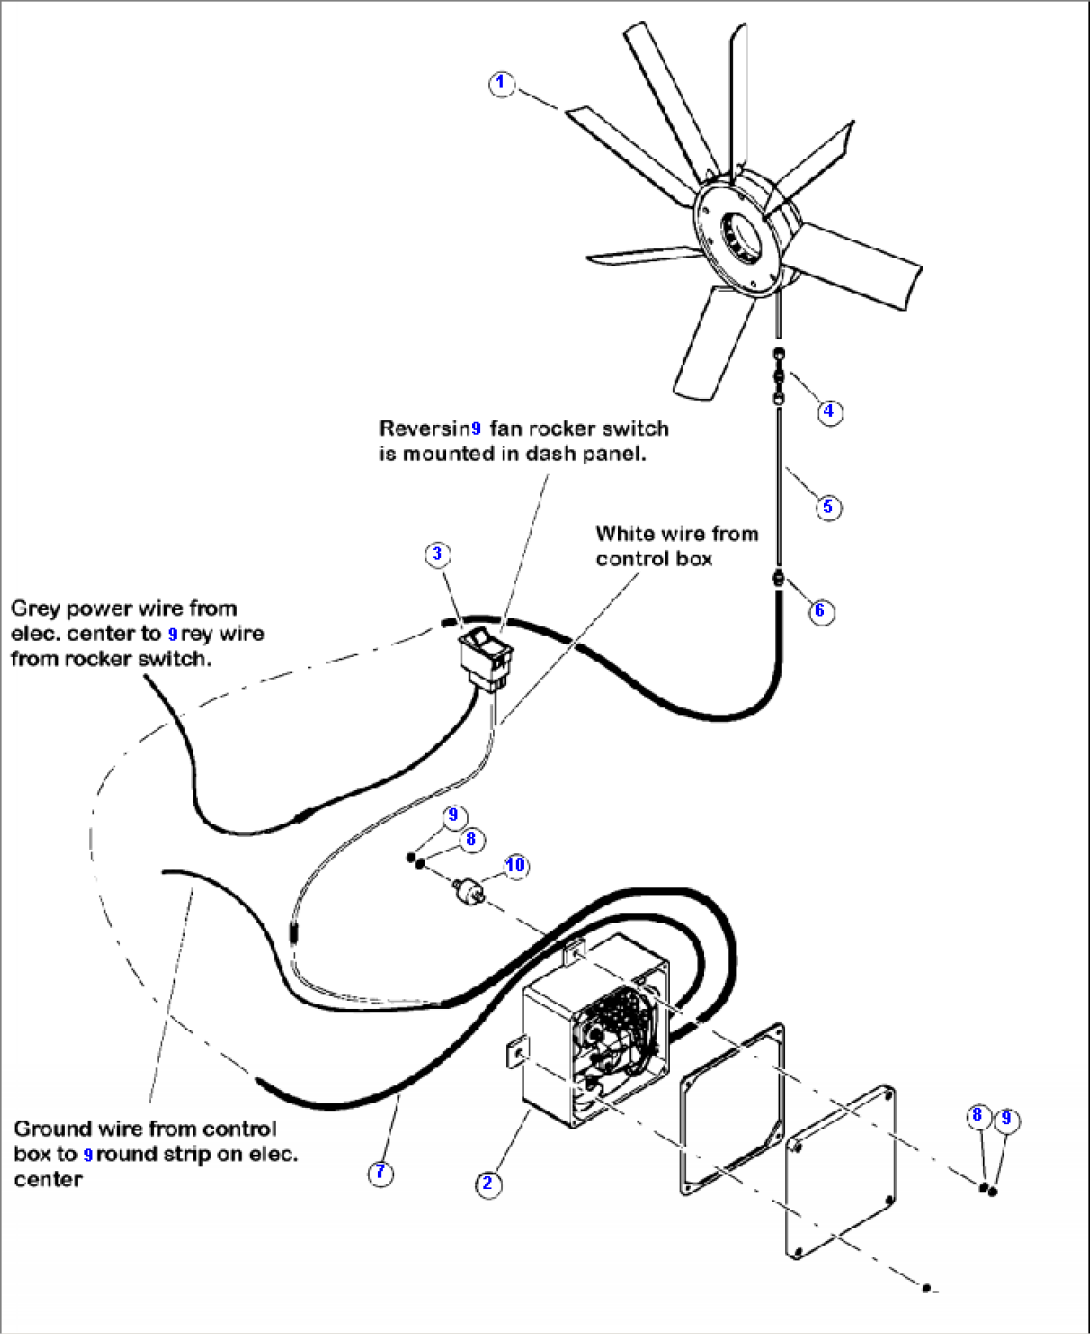 C0103-02A0 REVERSIBLE FAN CONTROL AND WIRING